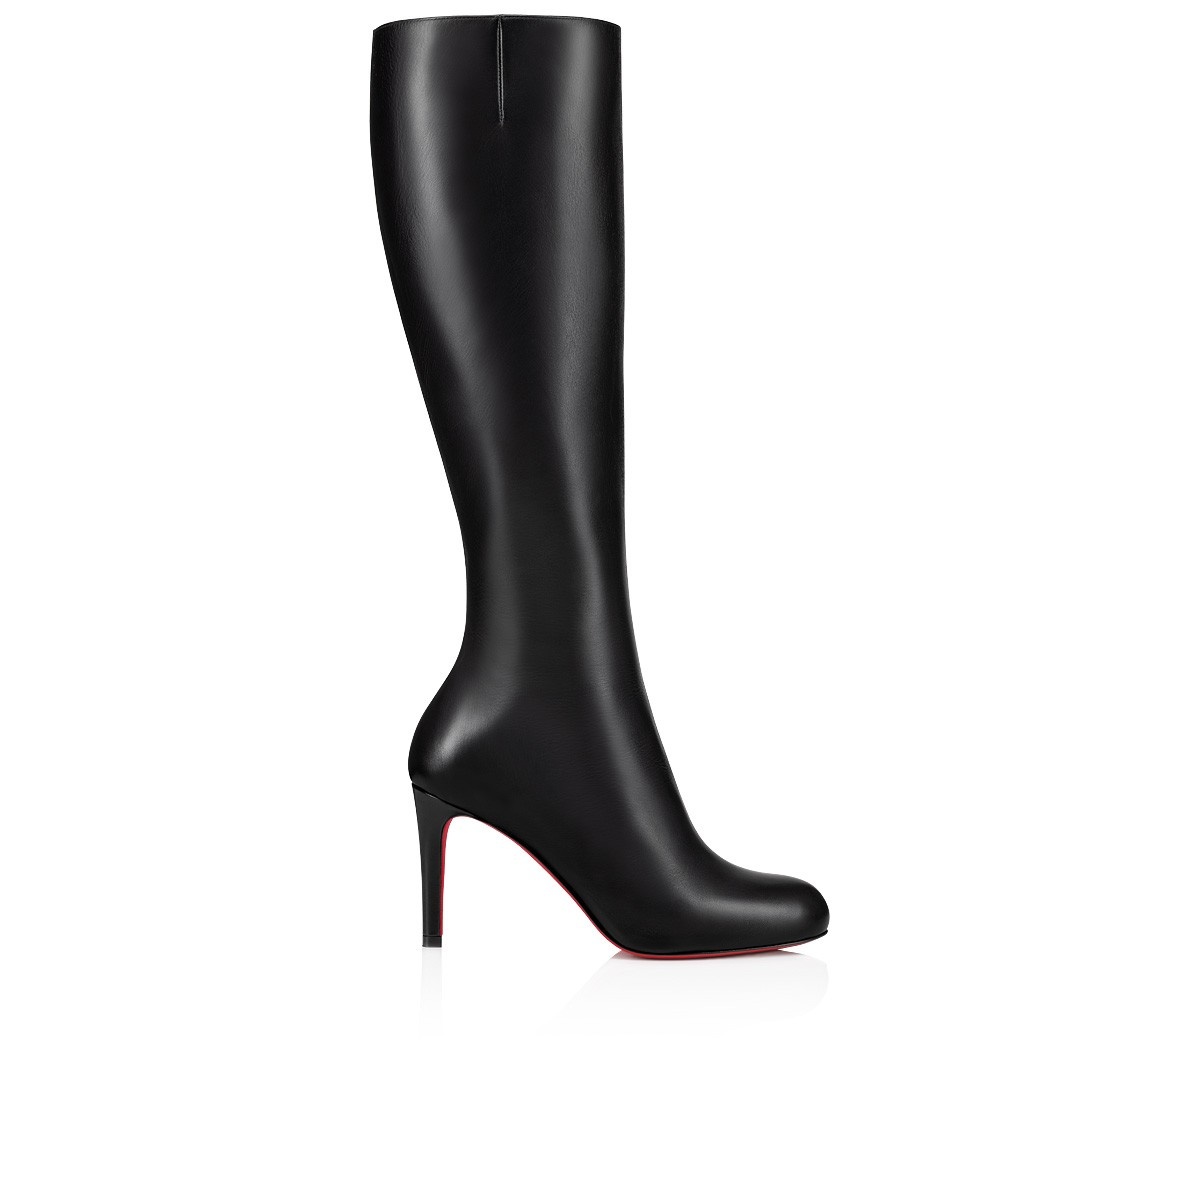 CHRISTIAN LOUBOUTIN Pumppie 85 leather knee boots in 2023  Leather knee  boots, Christian louboutin, Red bottom high heels